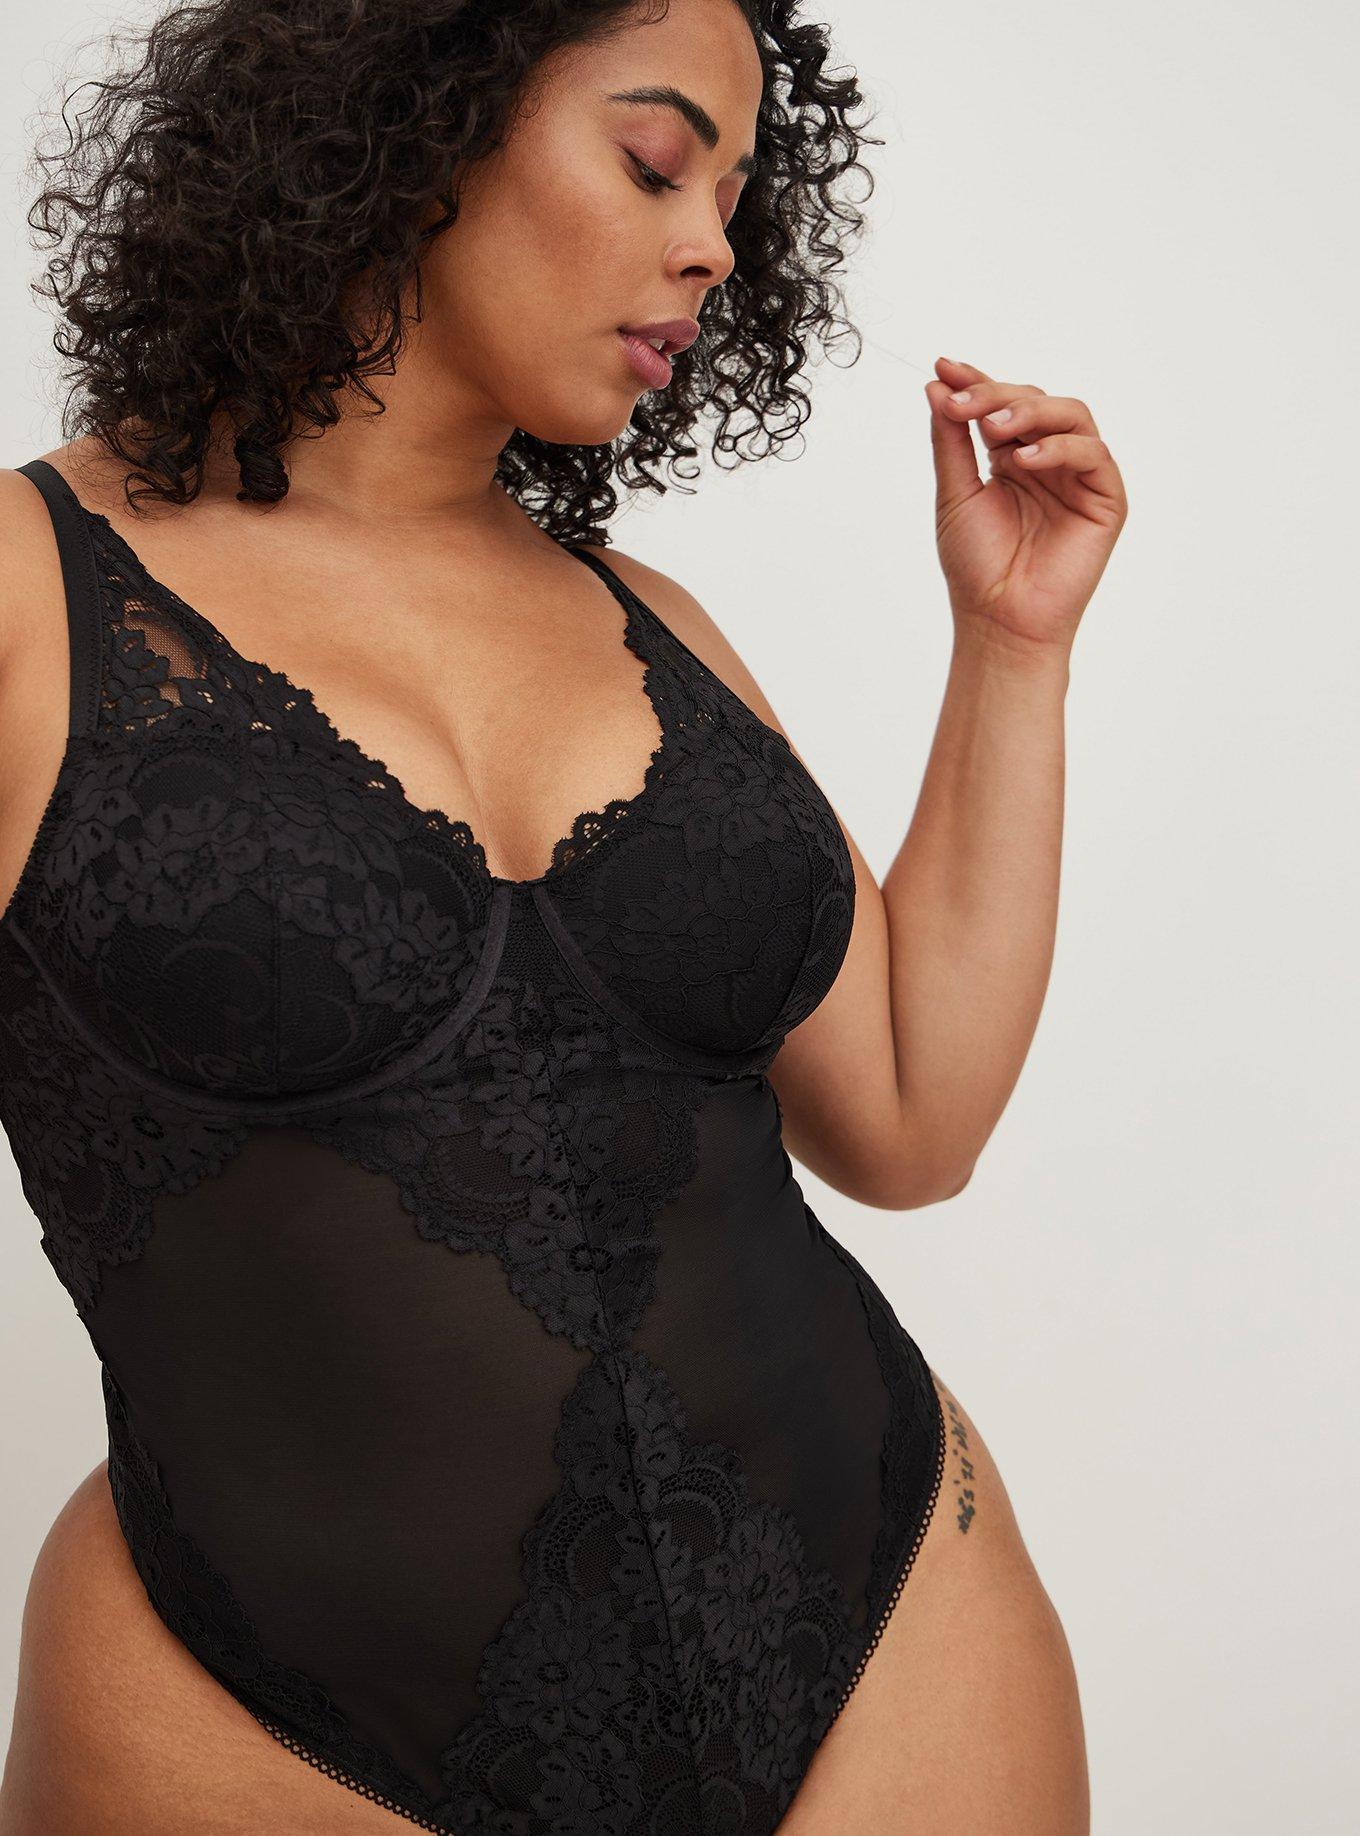 Torrid 2 2x 💚Underwire PLUS Slimming 1 Piece Swimsuit Sexy Lace